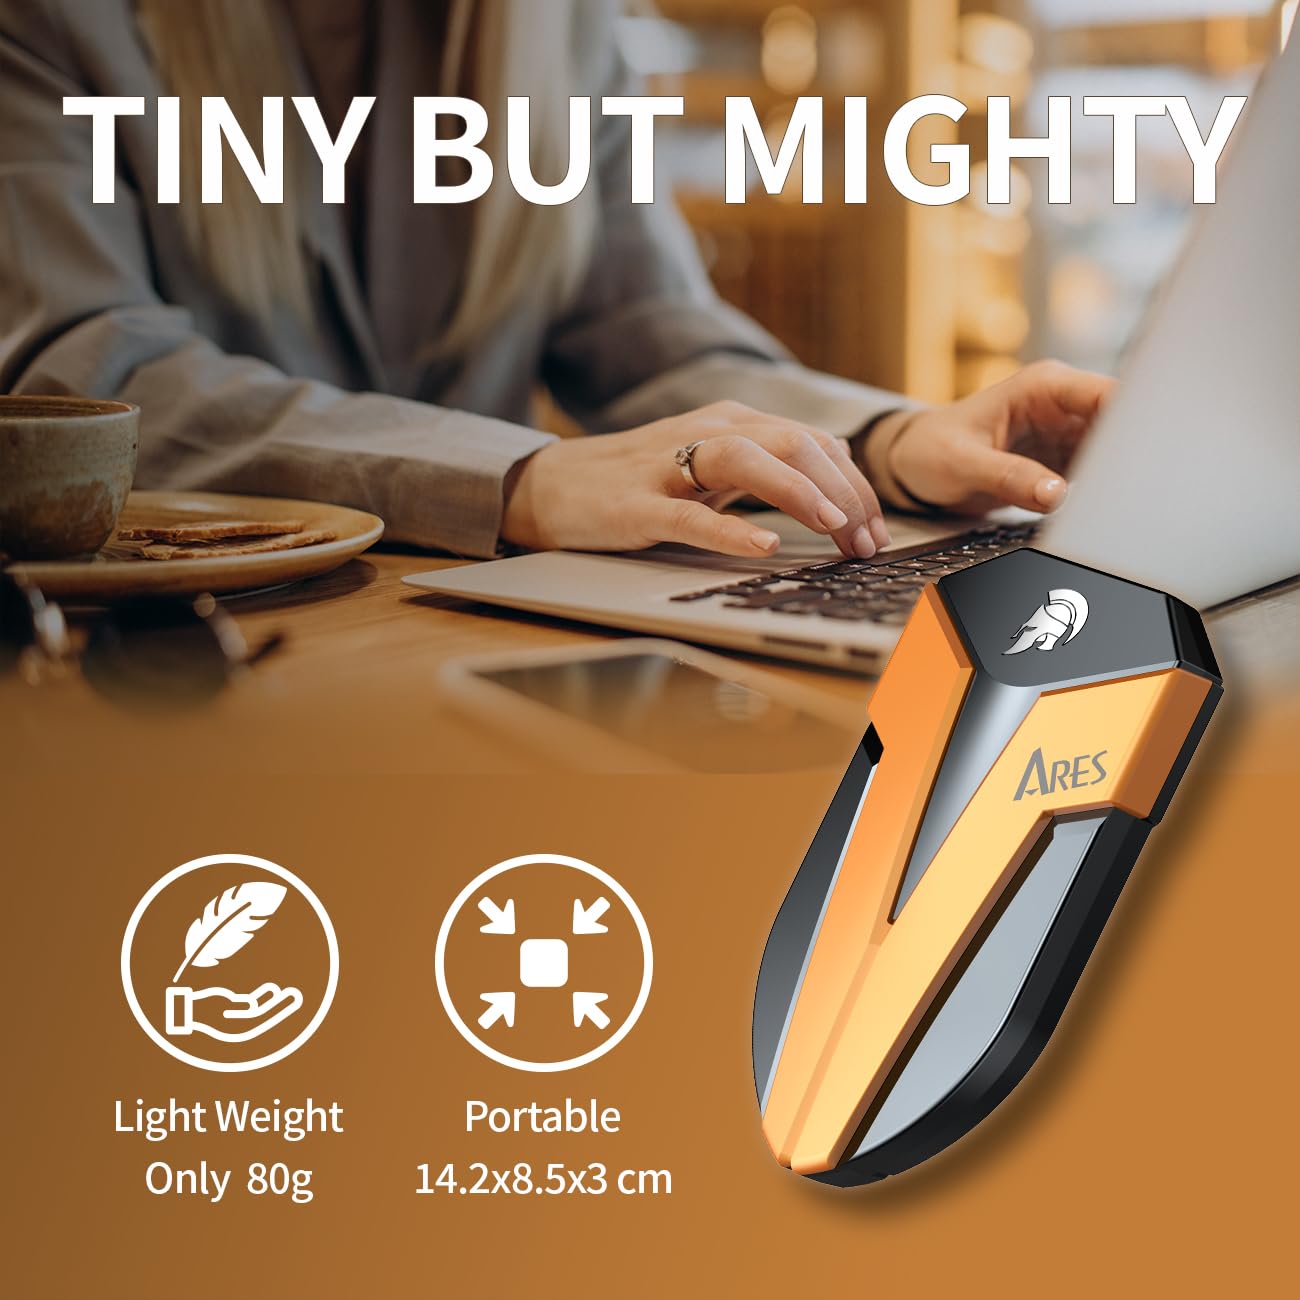 DATO 4TB External SSD, ARES Amber Shield Portable SSD, Up to 1600/1500 MB/s, OTG-Supported, Waterproof USB 3.2 Gen 2x2 Type C Rugged External Solid State Drive